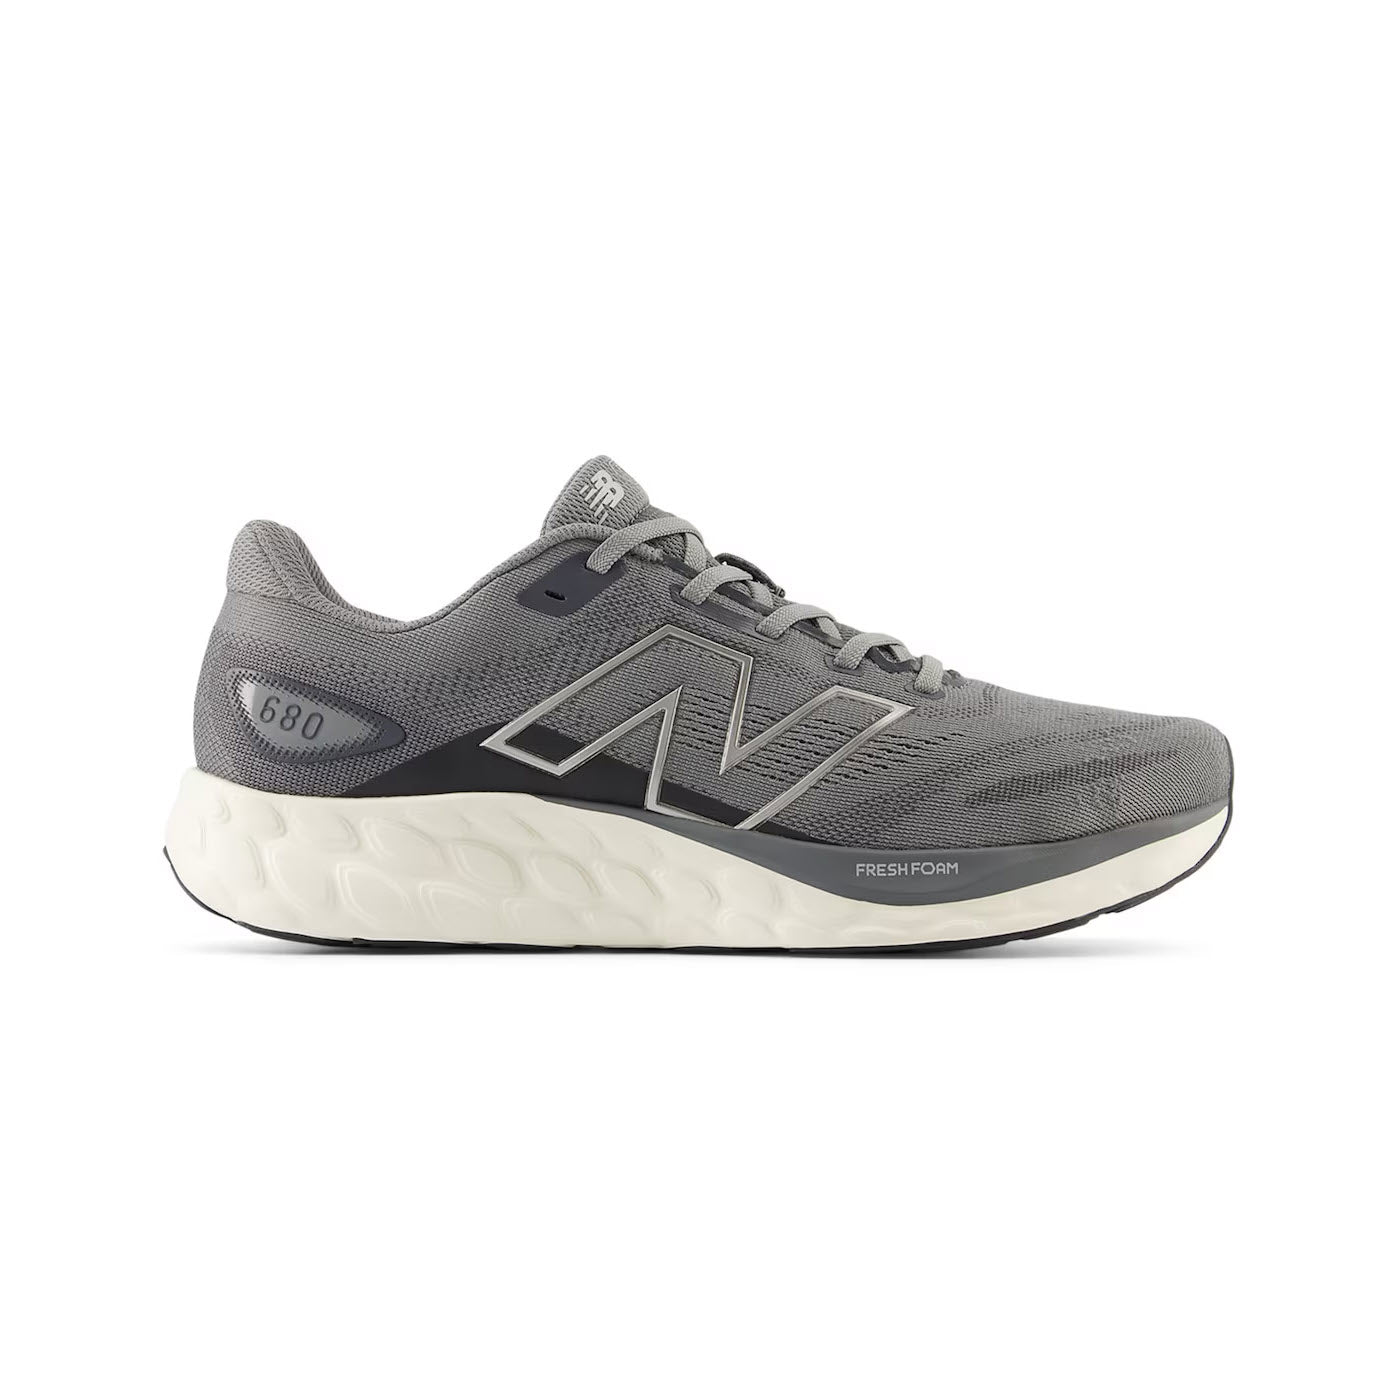 A New Balance 680v8 Blue Harbor Grey/Magnet/Dark Silver running shoe with a white sole, featuring the logo on the side and "fresh foam" text on the cushioned midsole.